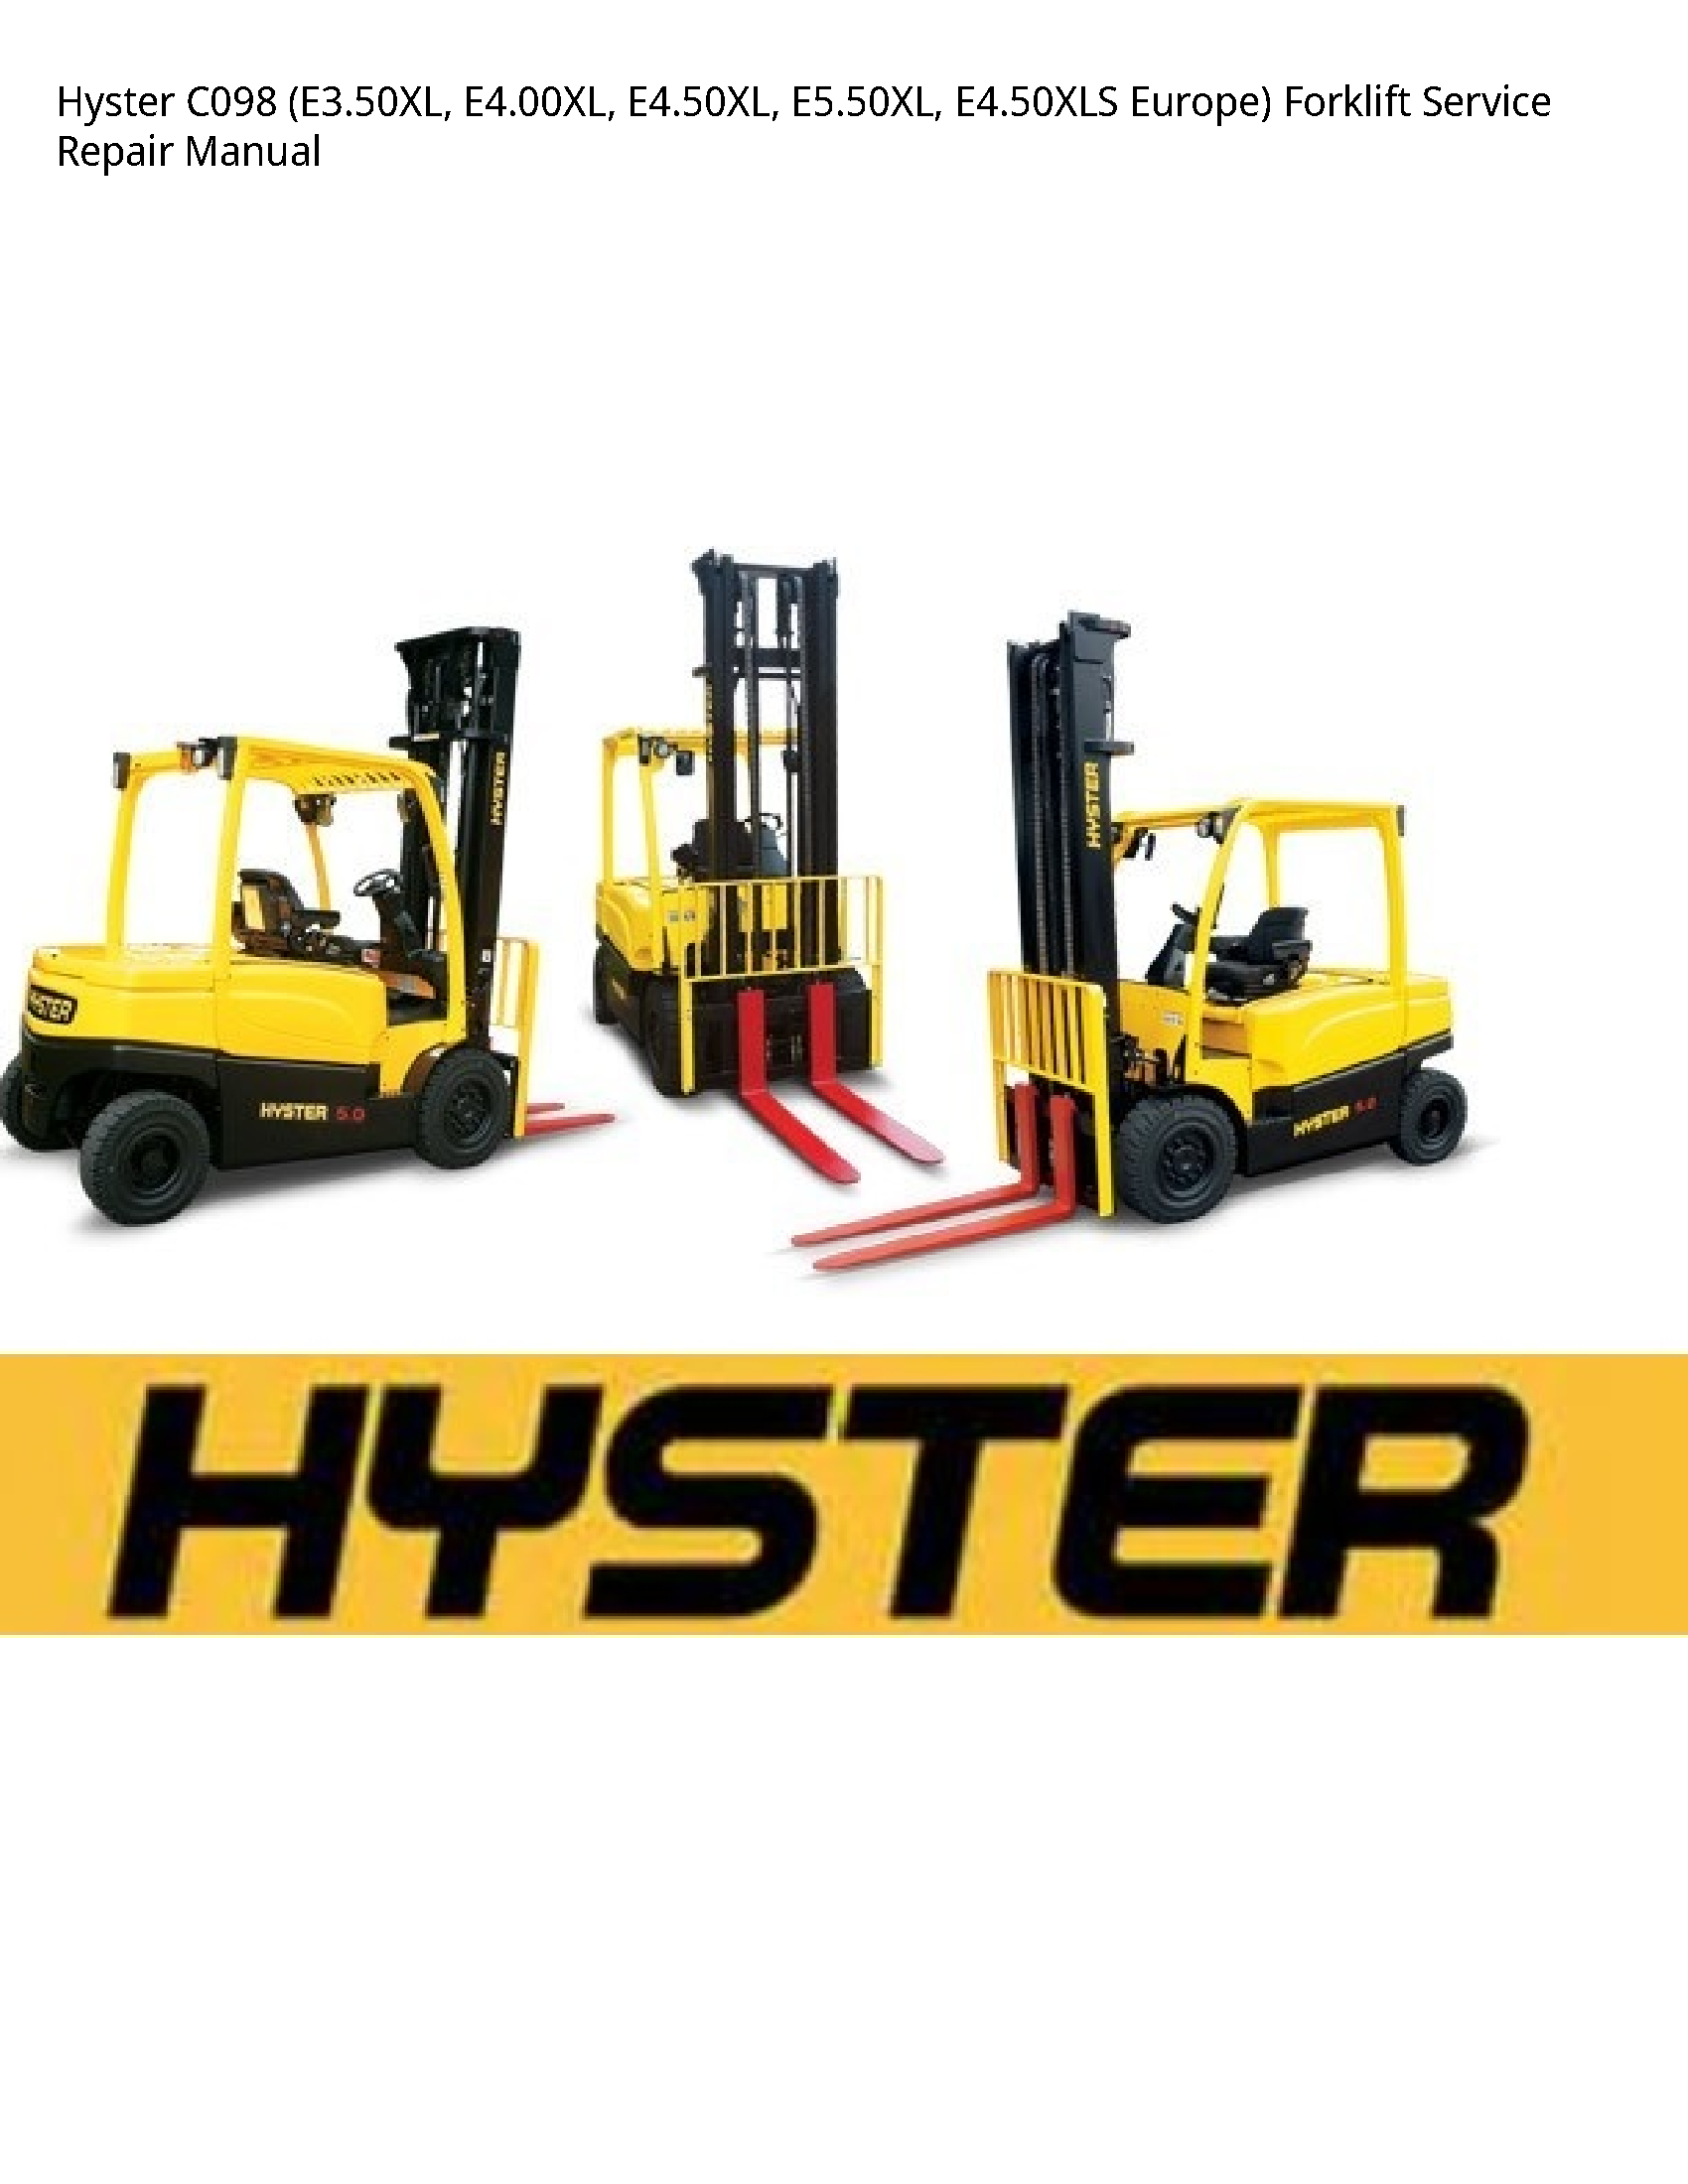 Hyster C098 Europe) Forklift manual